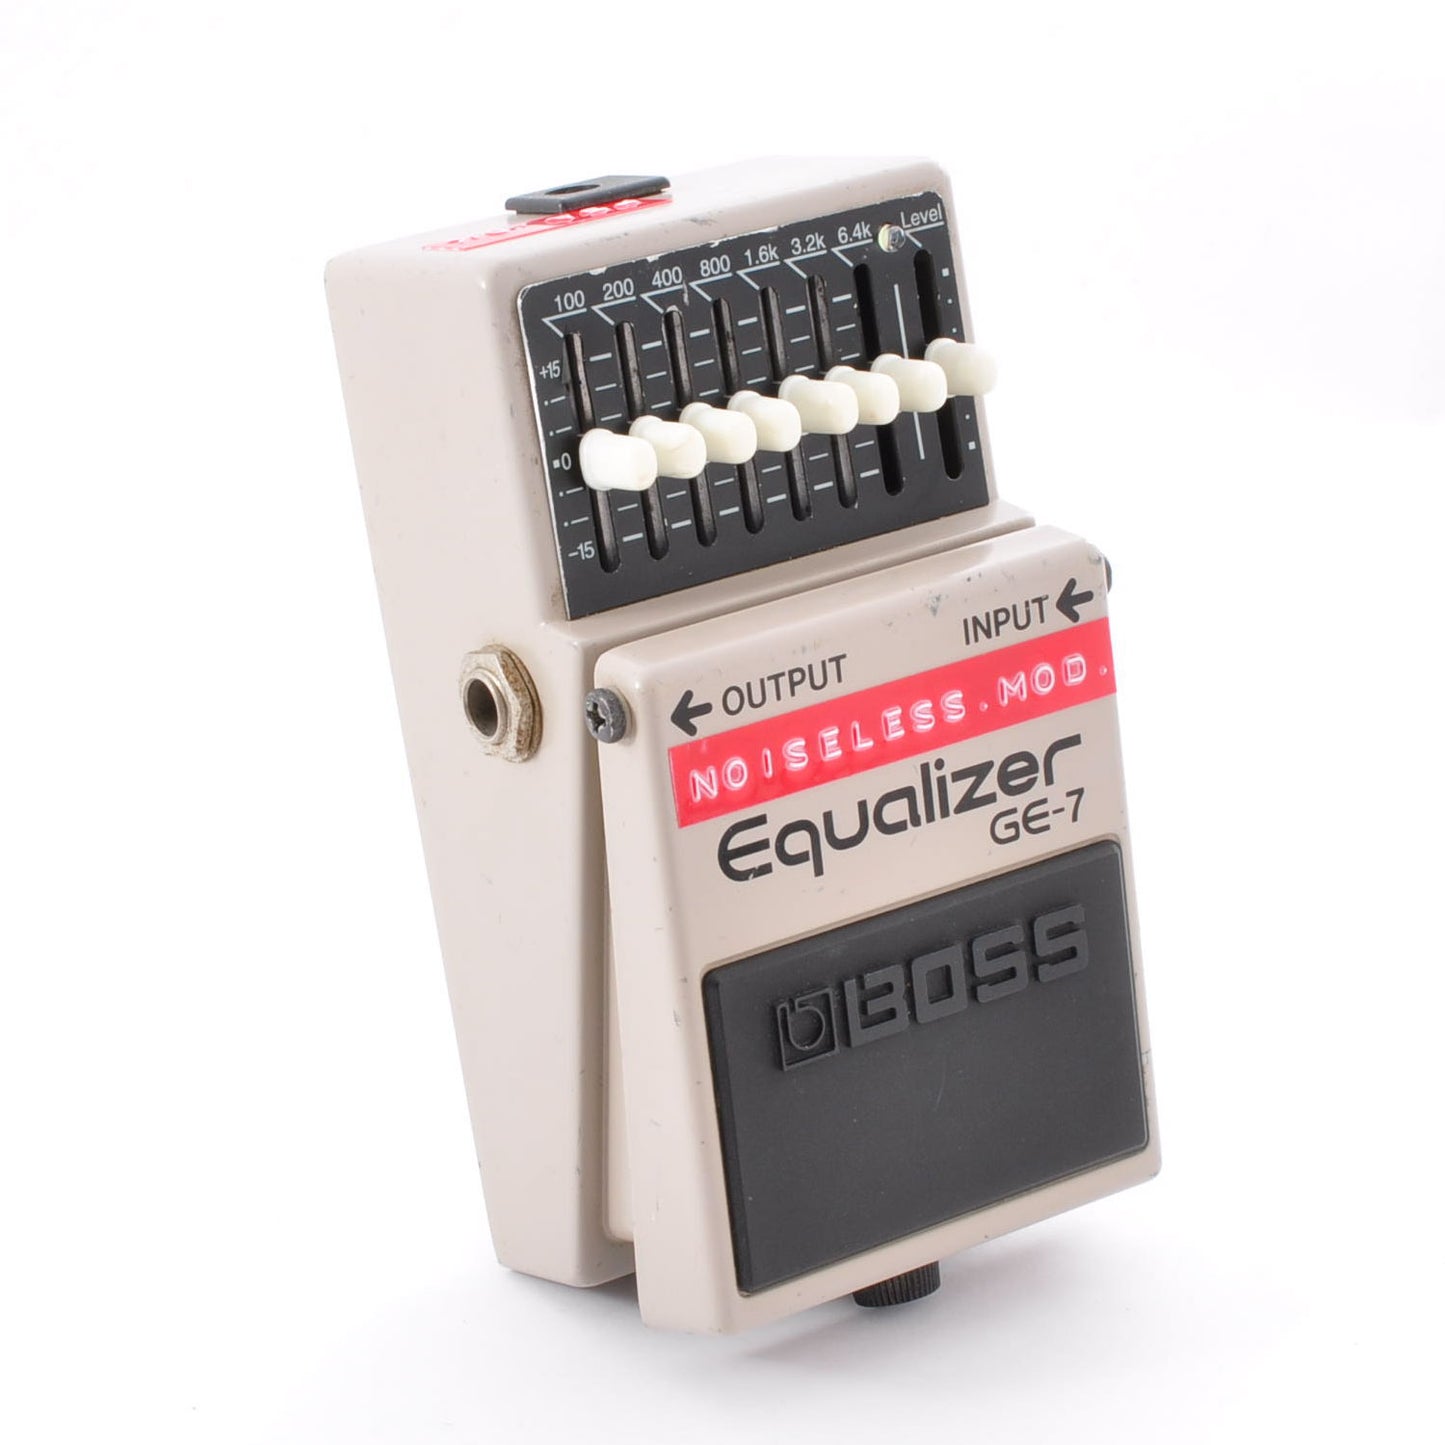 Boss GE-7 Modified Noiseless Equalizer PSA Guitar Effects Pedal Used From Japan #IL83848